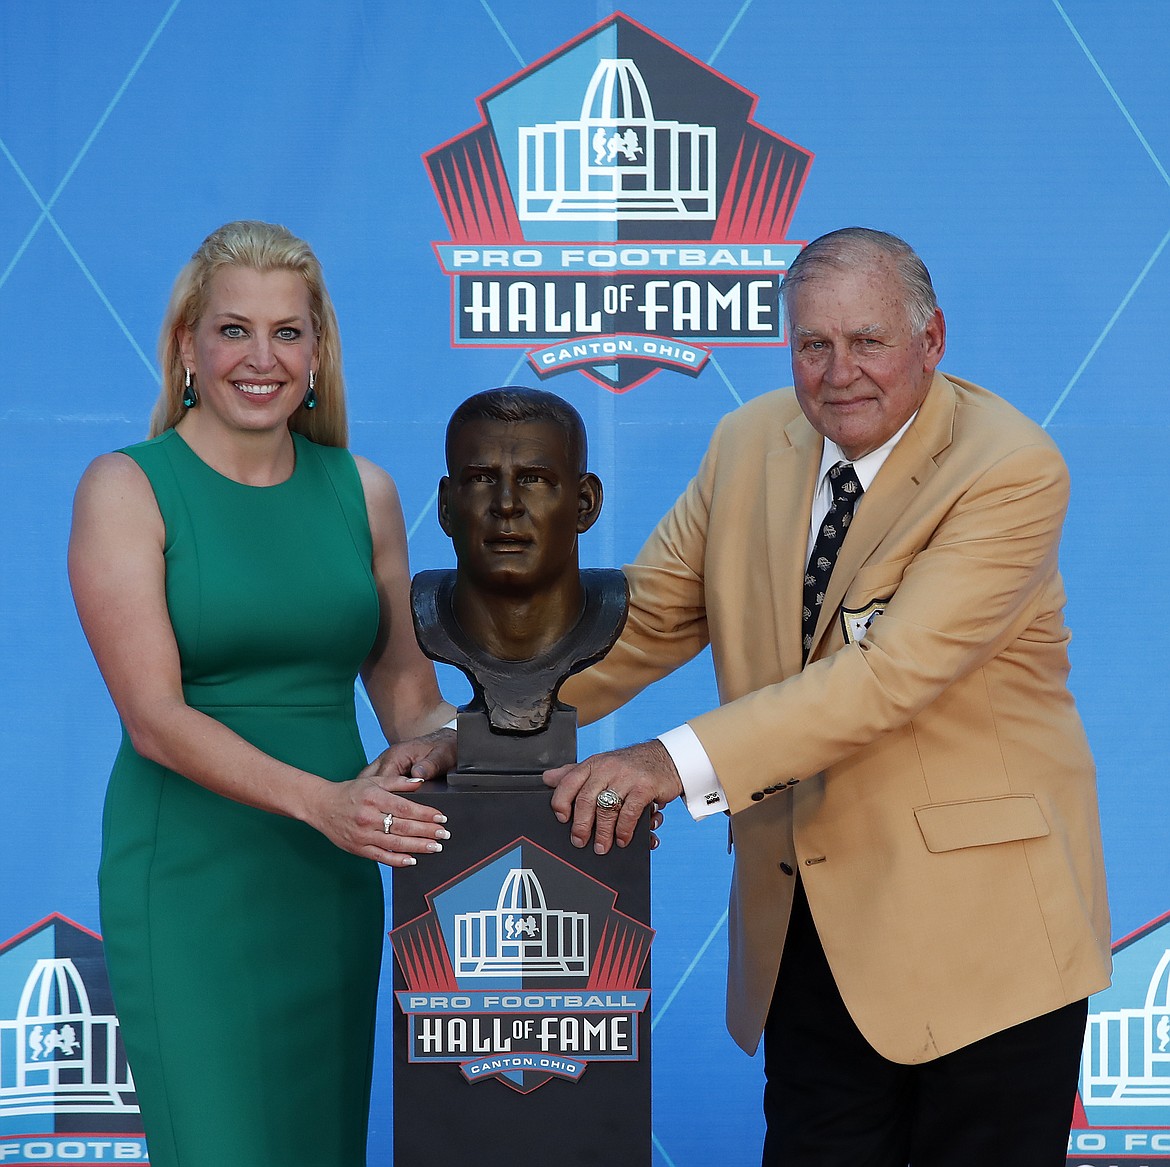 Former NFL player Jerry Kramer, right, poses with a bust of himself and presenter, daughter Alicia Kramer, during an induction ceremony at the Pro Football Hall of Fame, Saturday, Aug. 4, 2018 in Canton, Ohio. (AP Photo/Gene J. Puskar)